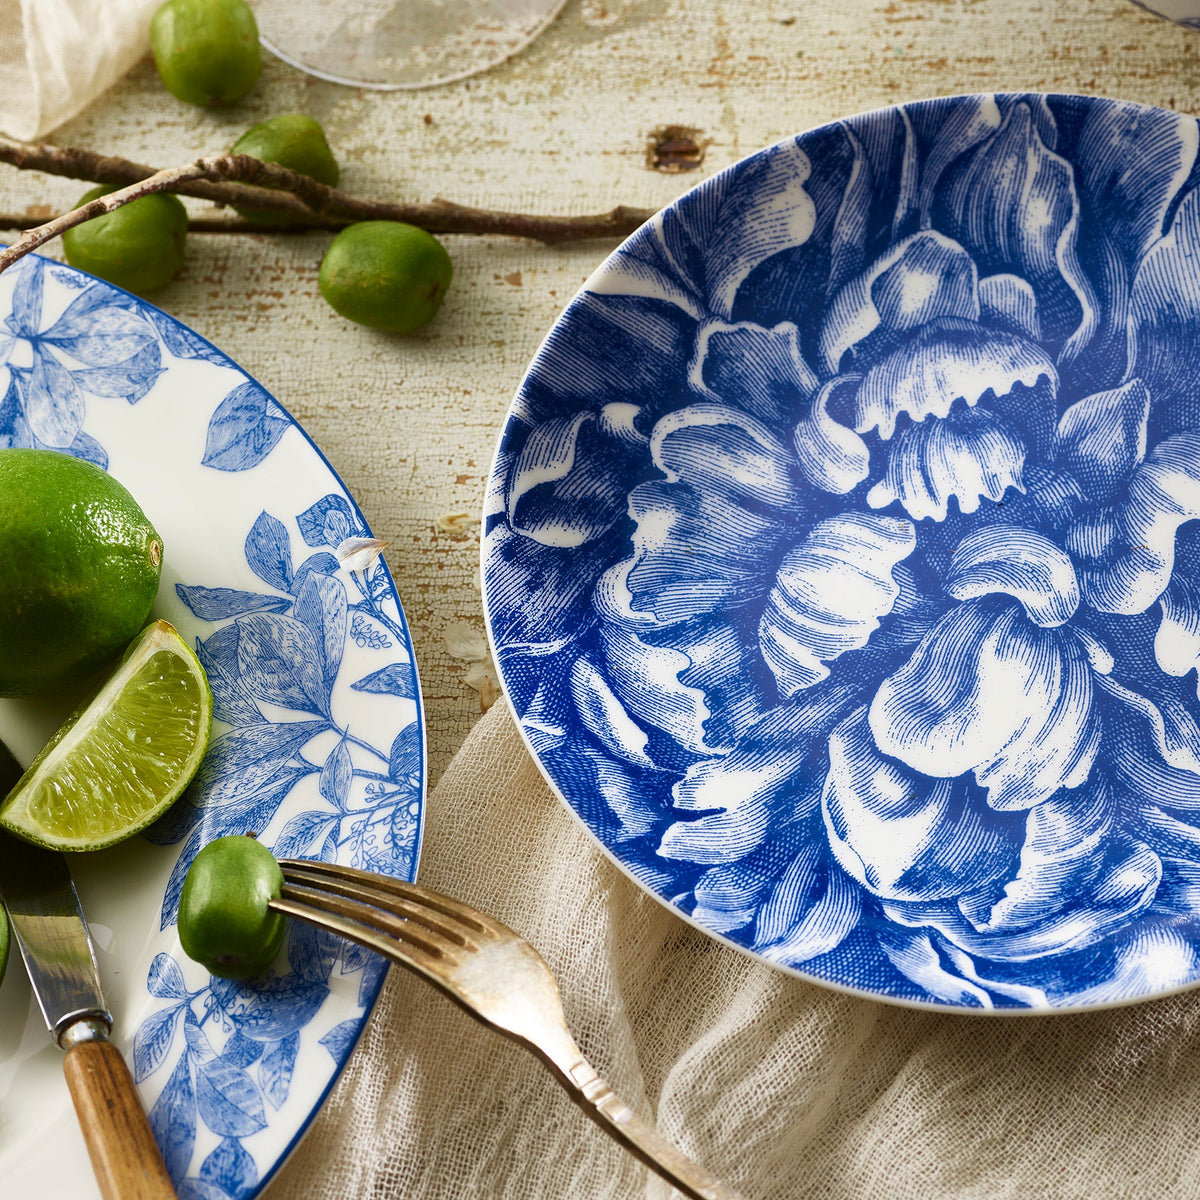 Blue and white floral Caskata Artisanal Home Peony Coupe Salad Plates with whole and sliced limes, and vintage silverware on a wooden table.